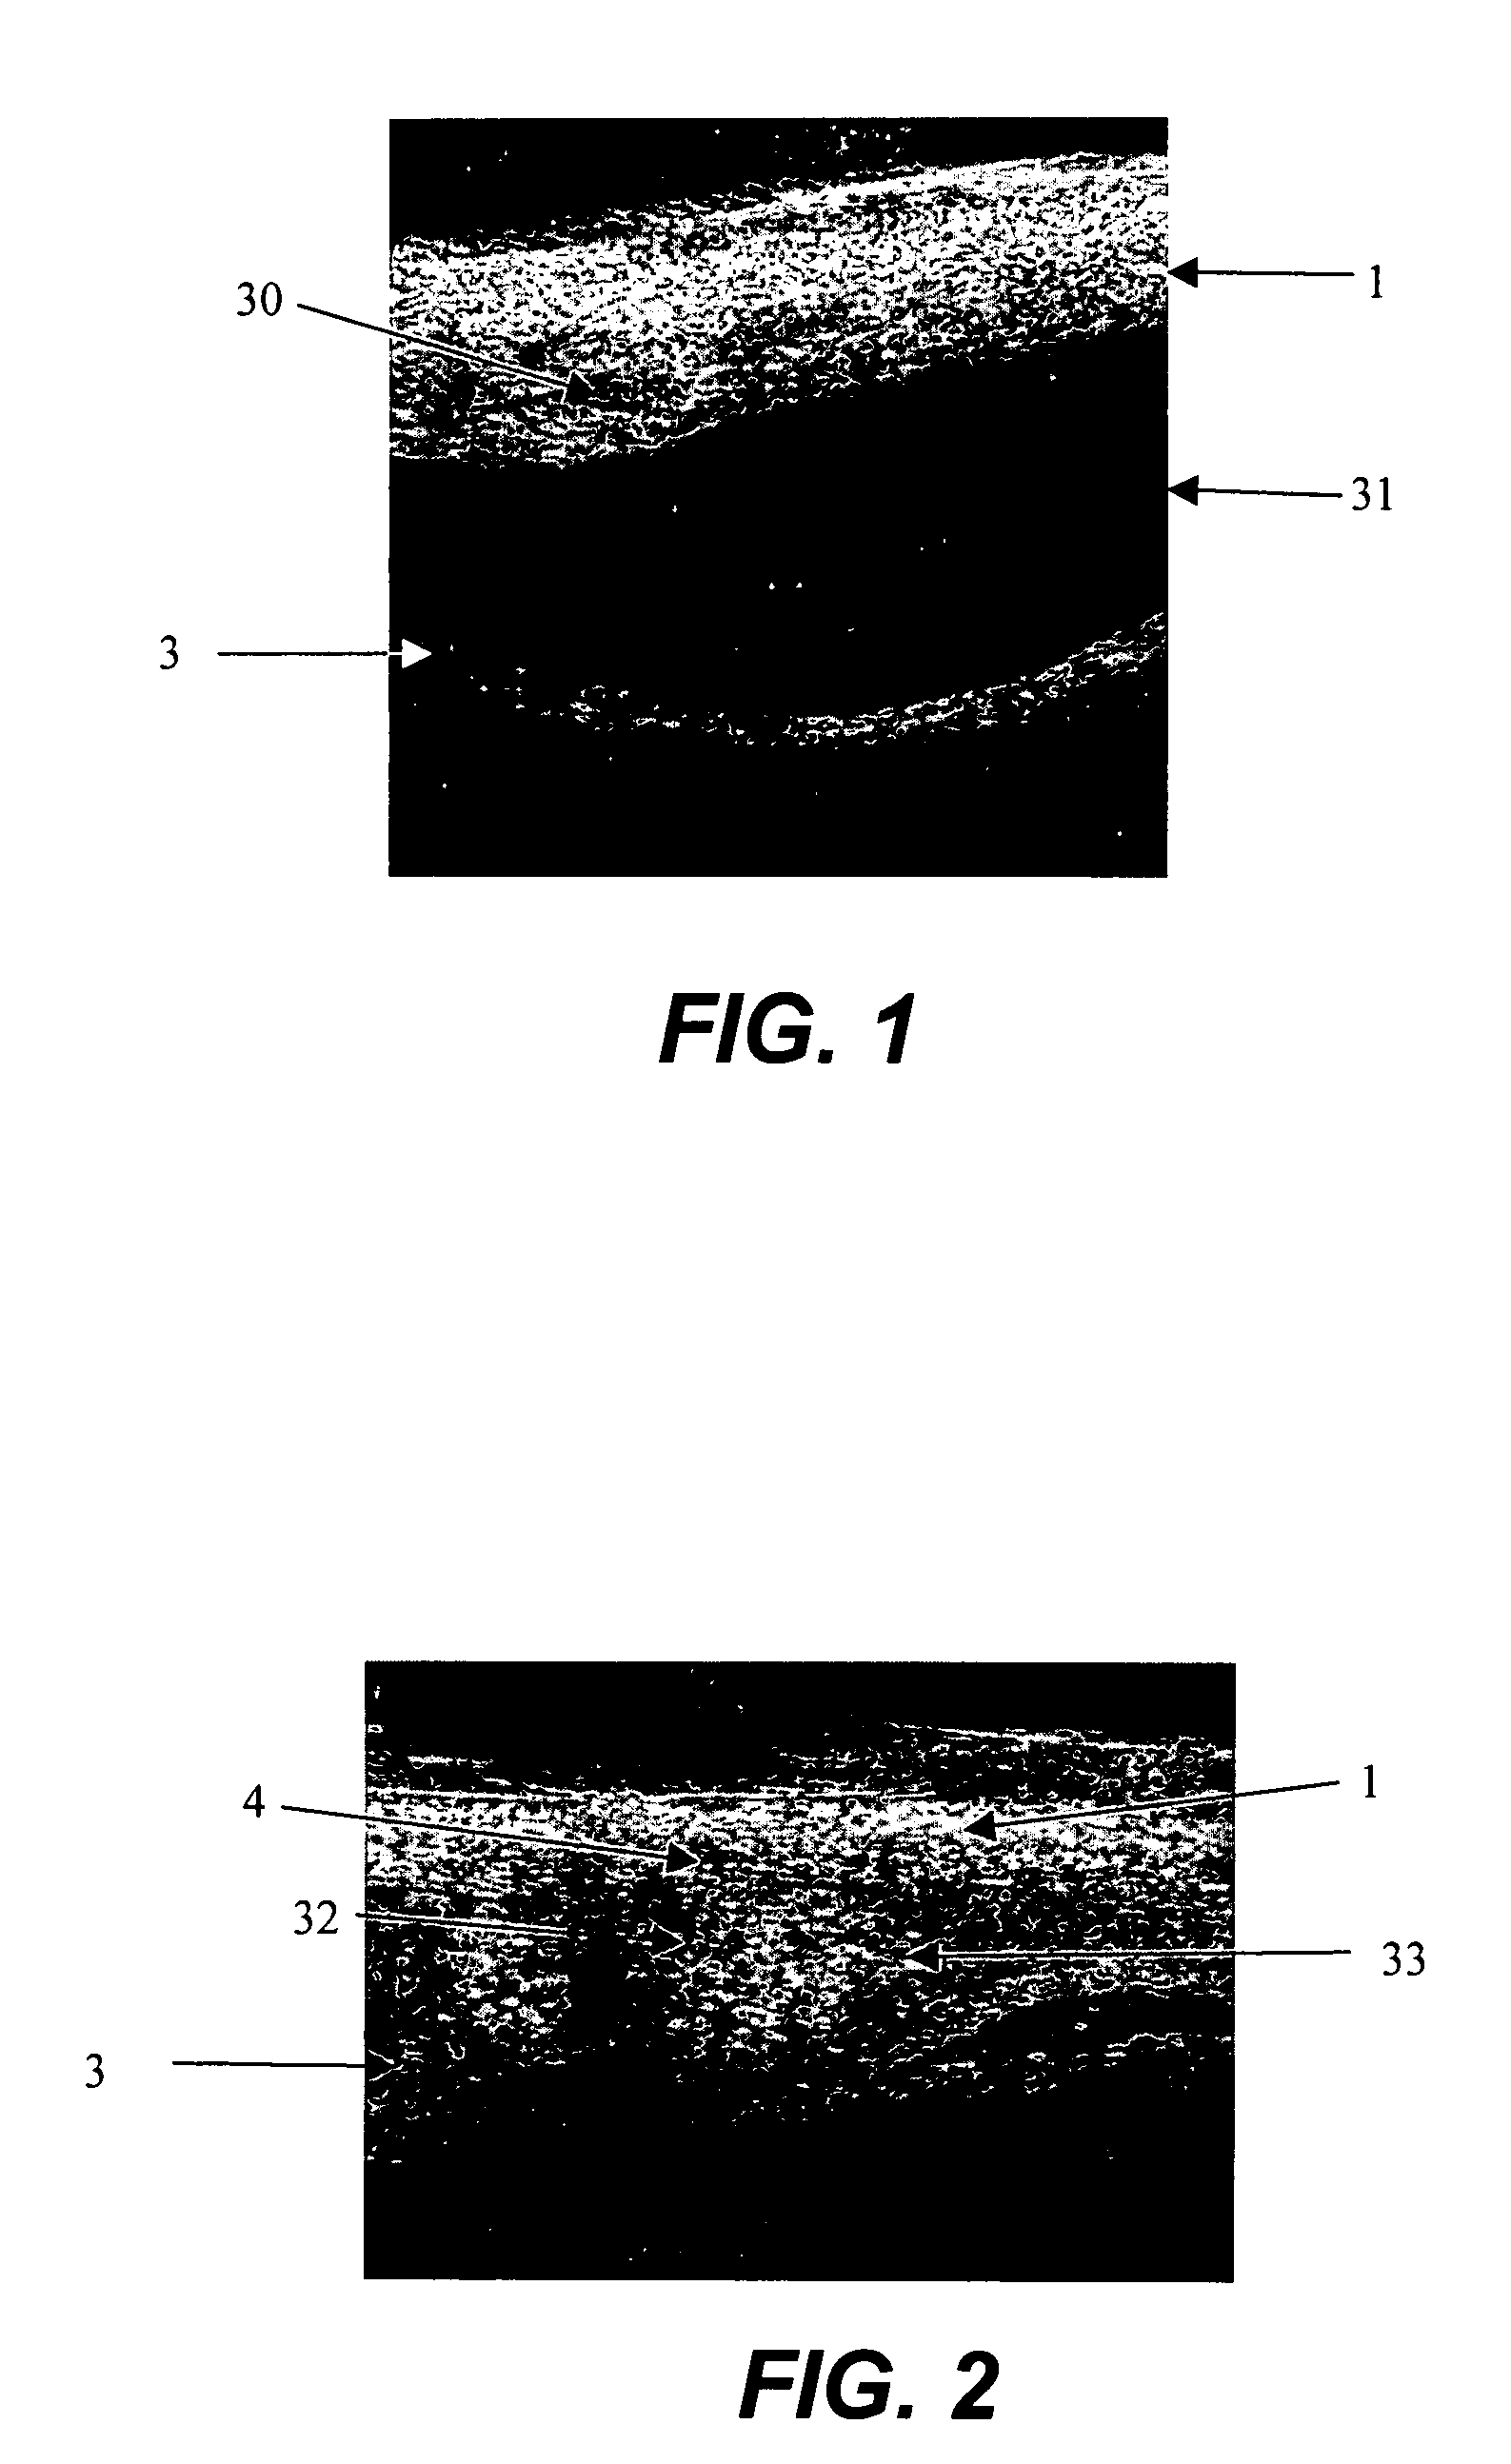 Apparatus and formulations for suprachoroidal drug delivery